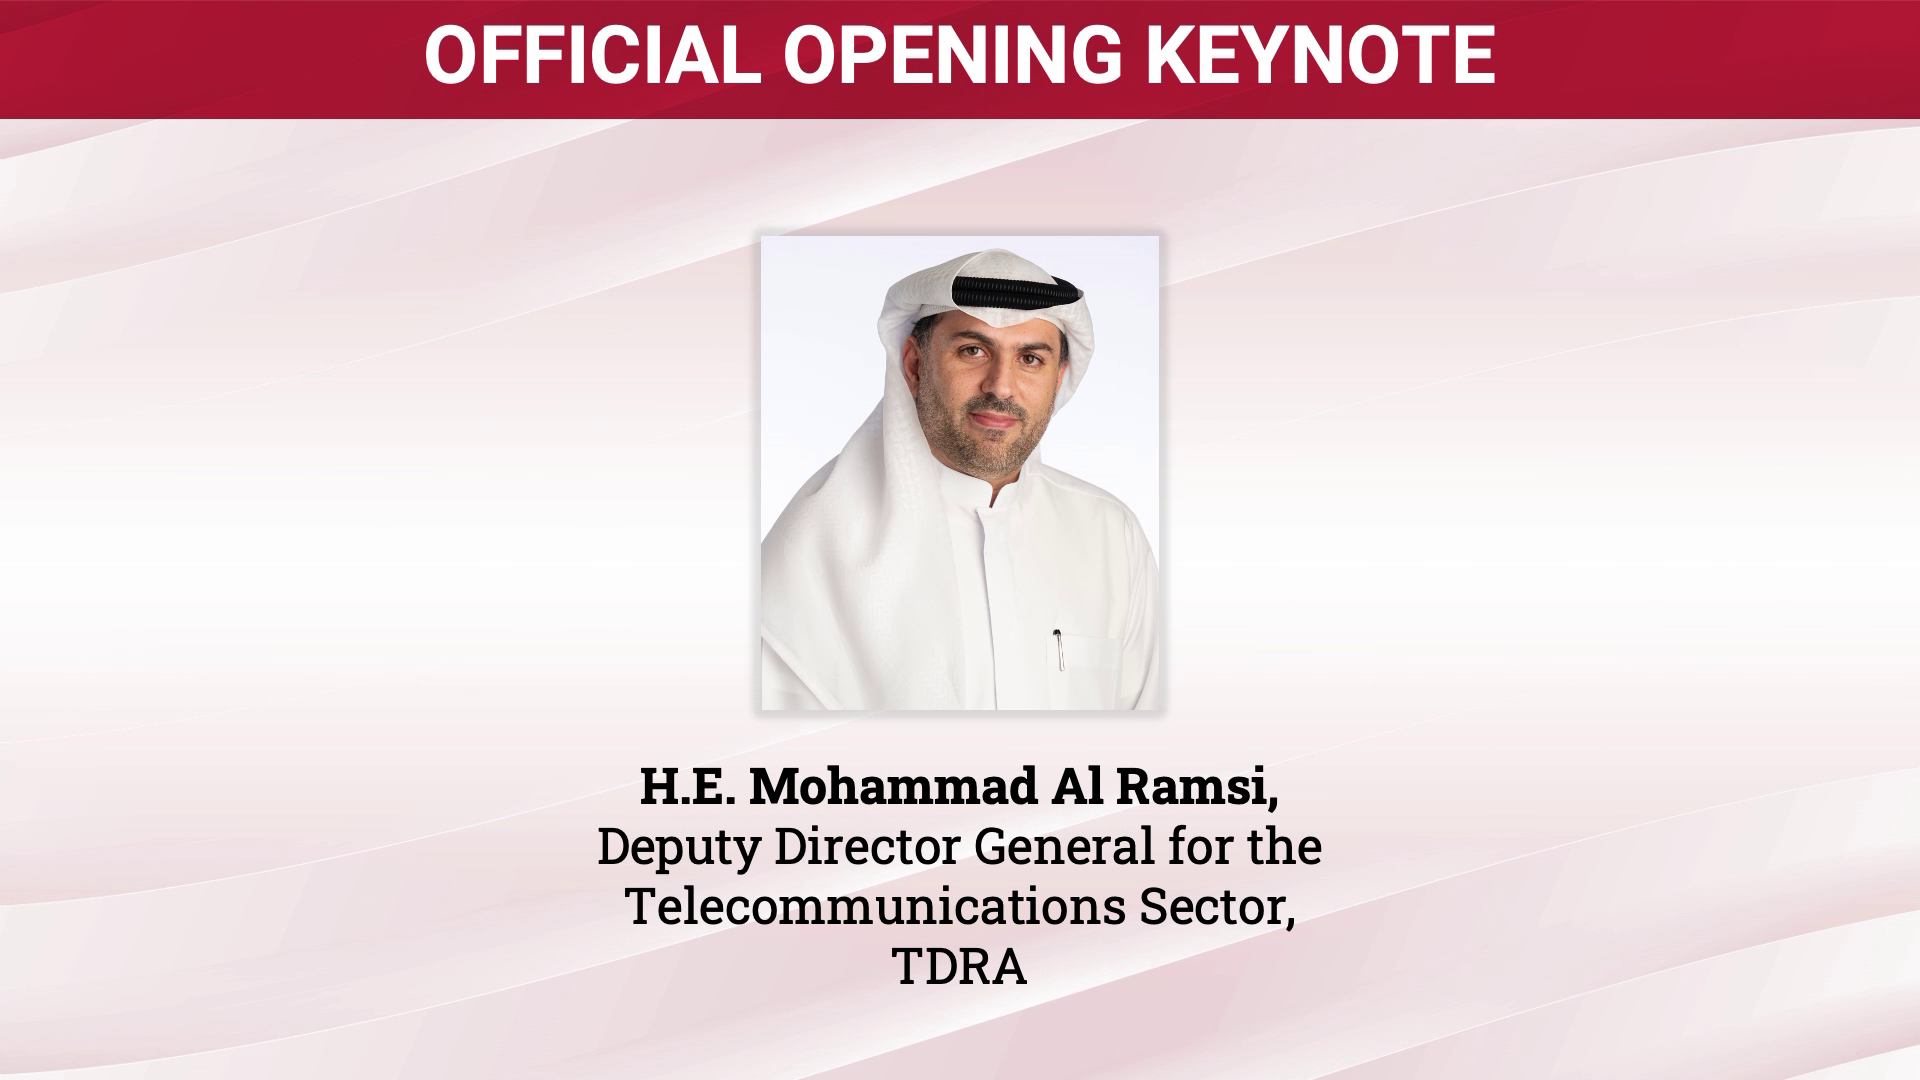 OFFICIAL OPENING KEYNOTE: H.E. Mohammad Al Ramsi, Deputy Director General for the Telecommunications Sector, TDRA